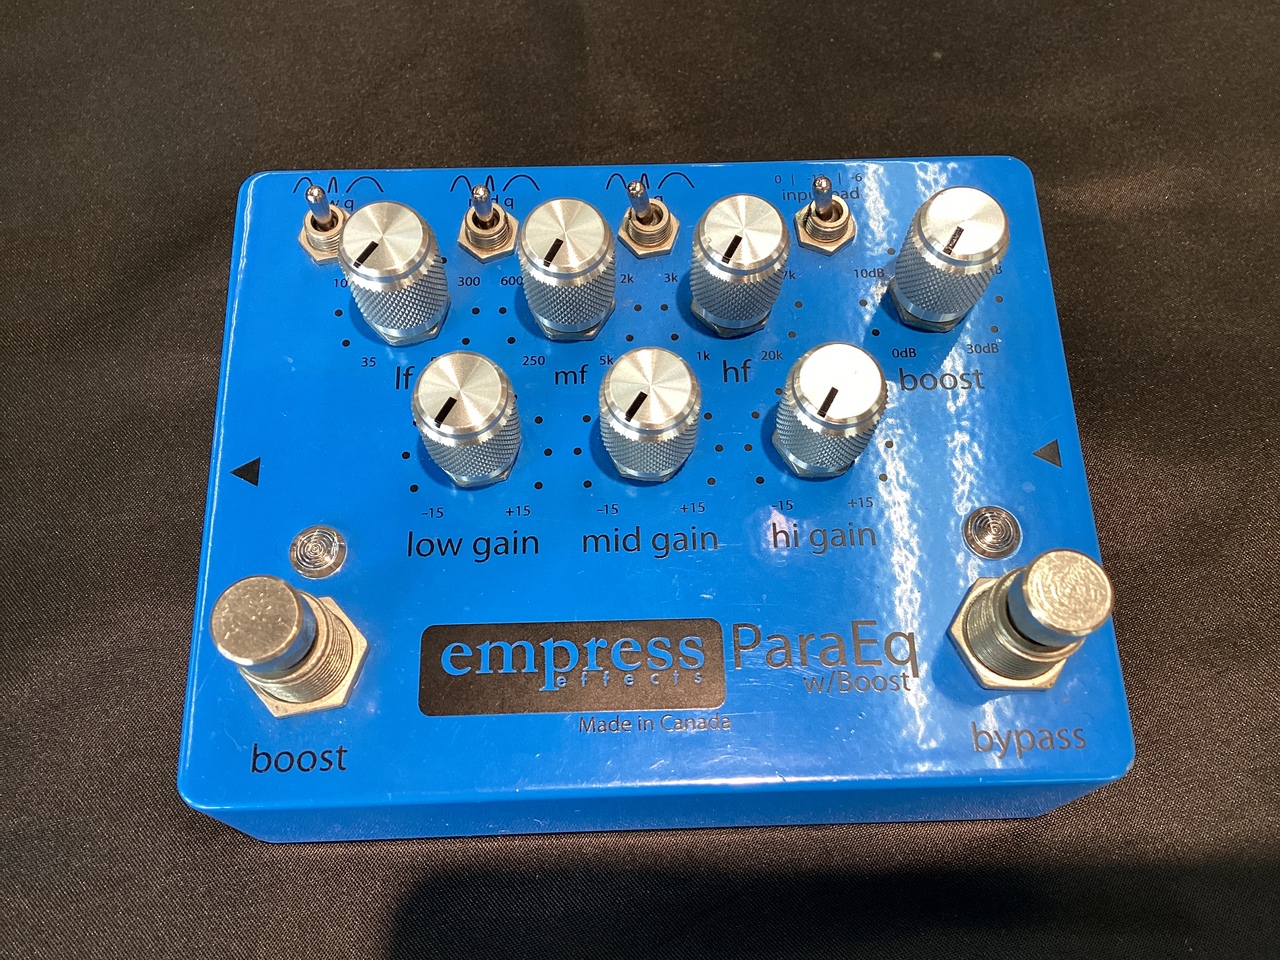 empress ParaEq with boost電源DC9V-アダプター駆動